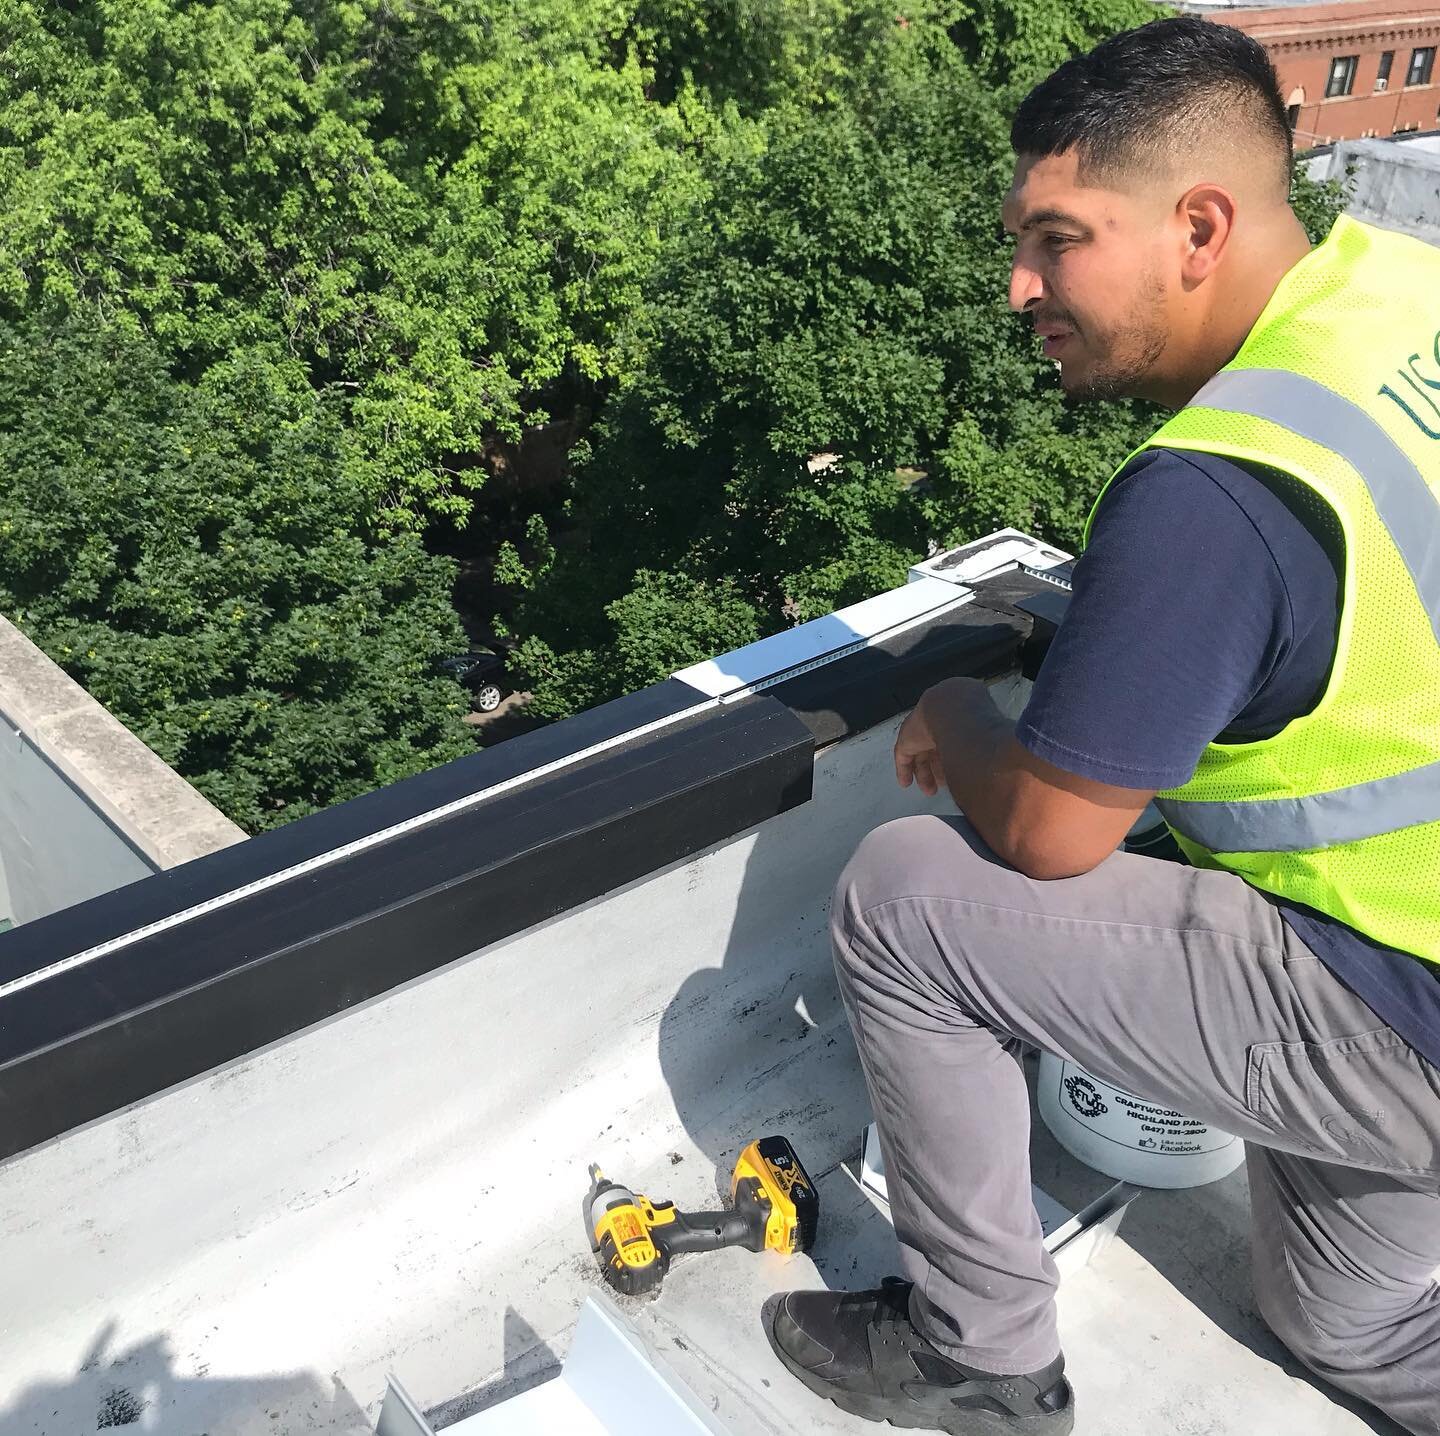 Installing the WickRight venting system on top of the parapet wall. The metal coping cover would follow.
.
.
.
.
.
#parapetwall #parapetwallreplacement #parapetwallreplacements #copingcovers #copingcover
#certifiedroofers #certifiedroofingcompany #co